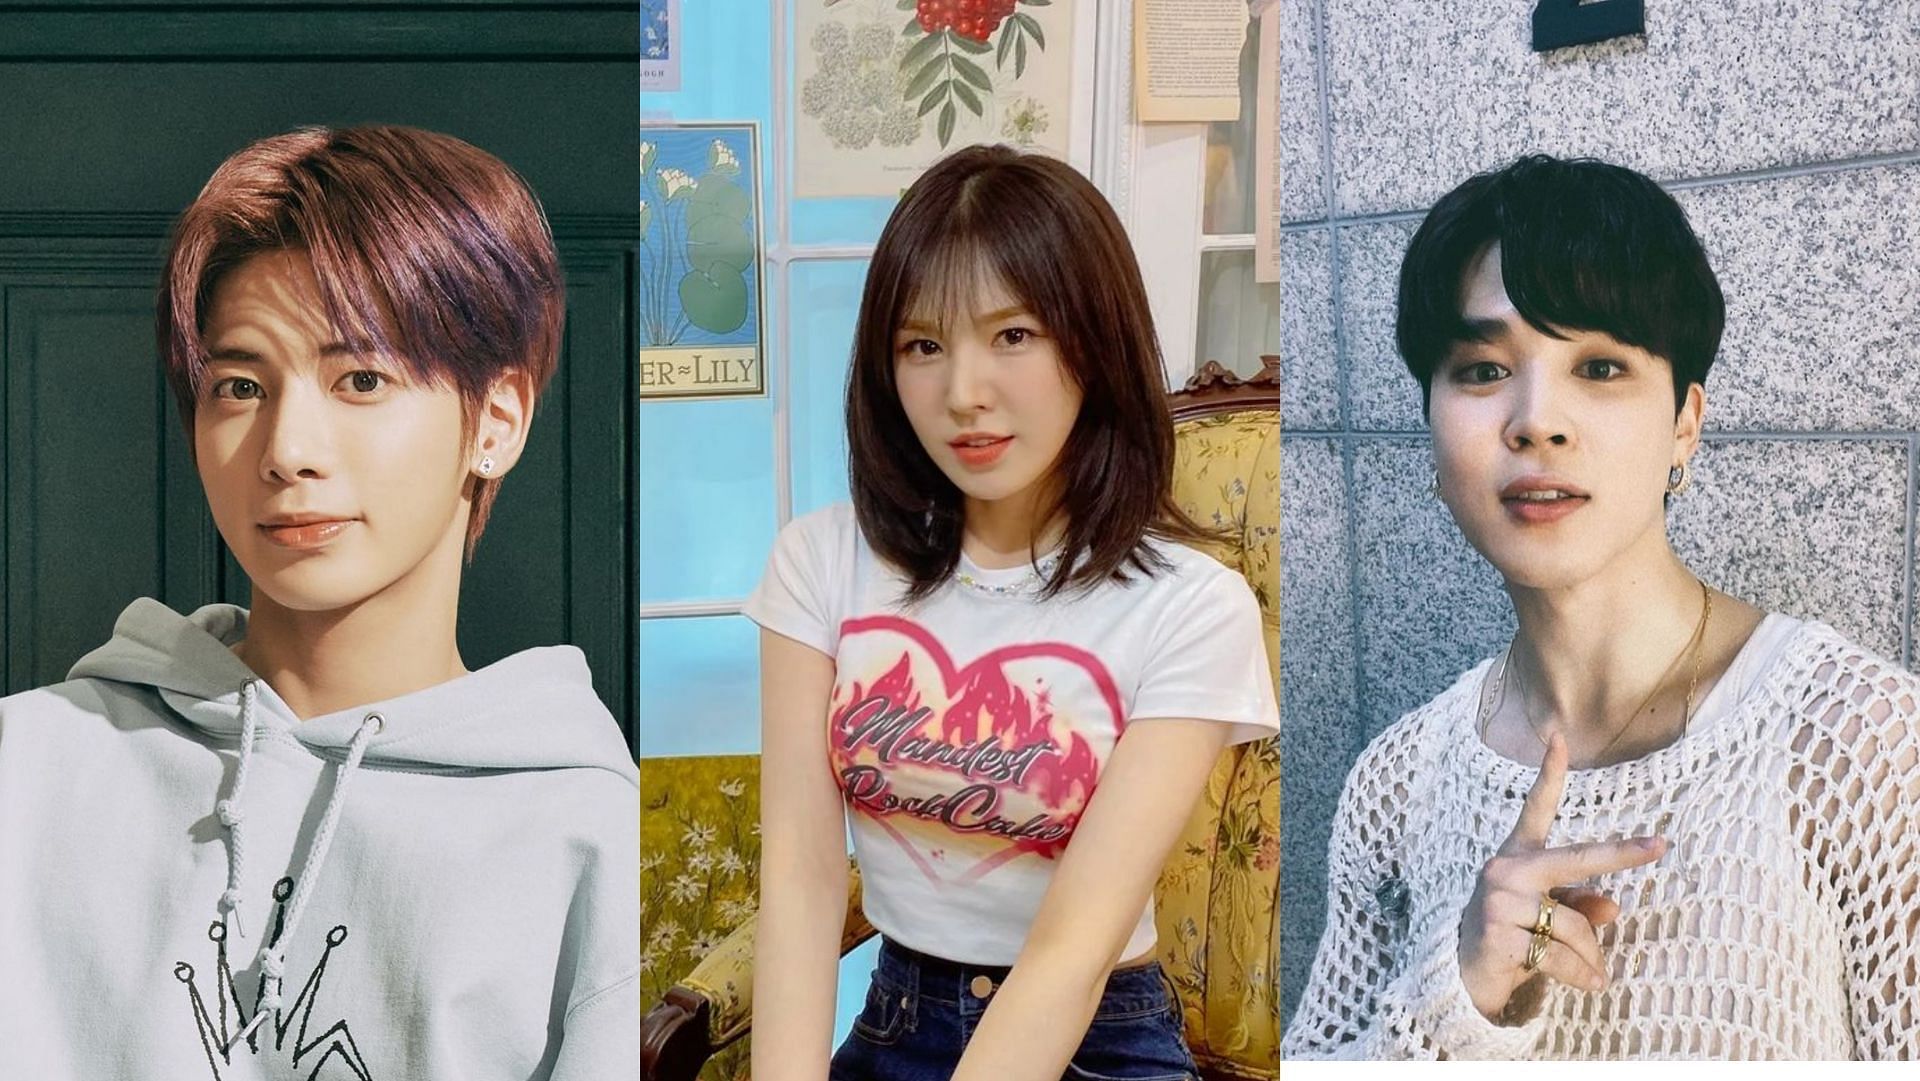 TXT&#039;s Taehyun, Red Velvet&#039;s Wendy, and BTS&#039; Jimin are some of the K-pop idols who landed in controversies. (Images via Instagram/ @txt_bighit @redvelvet.smtown @j.m)